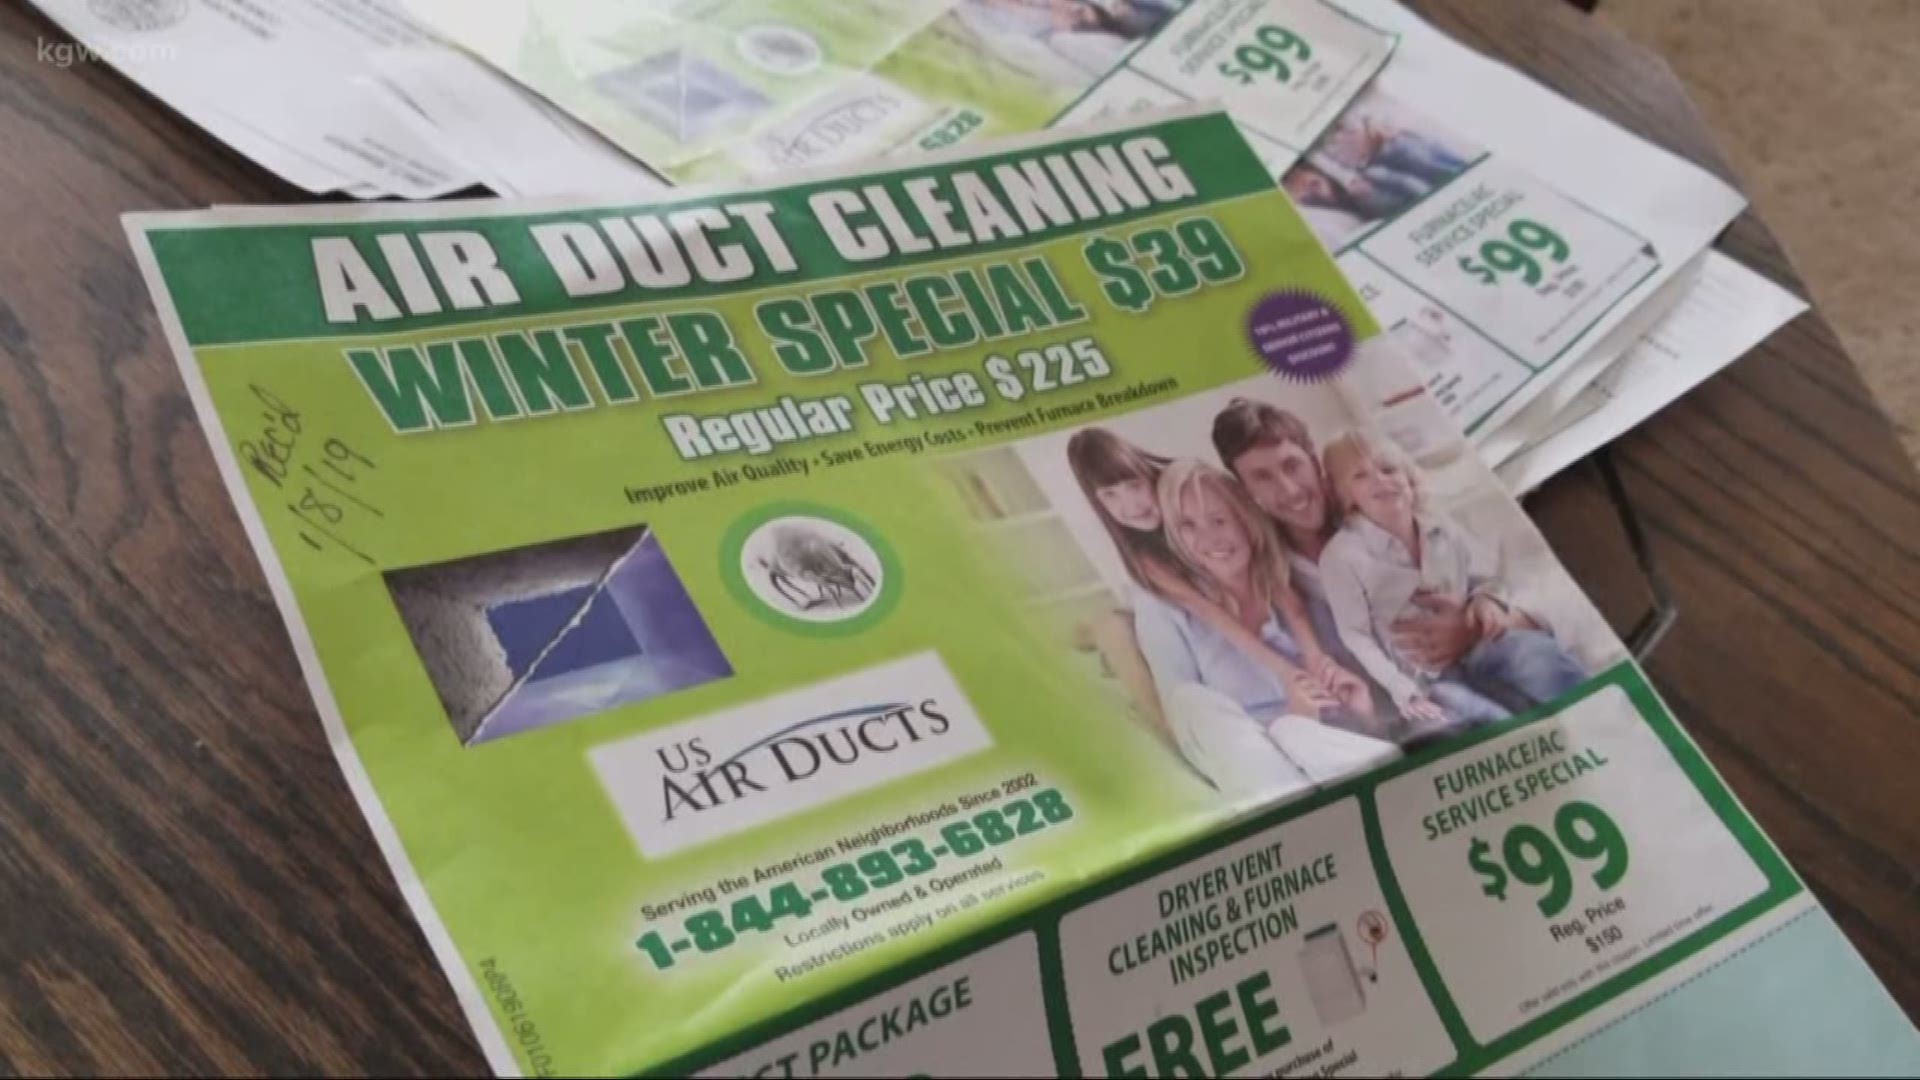 A lawsuit says Vancouver-based U.S. Air Ducts mailed 20 million print ads and made over 11 million unwanted robocalls to Oregon residents.